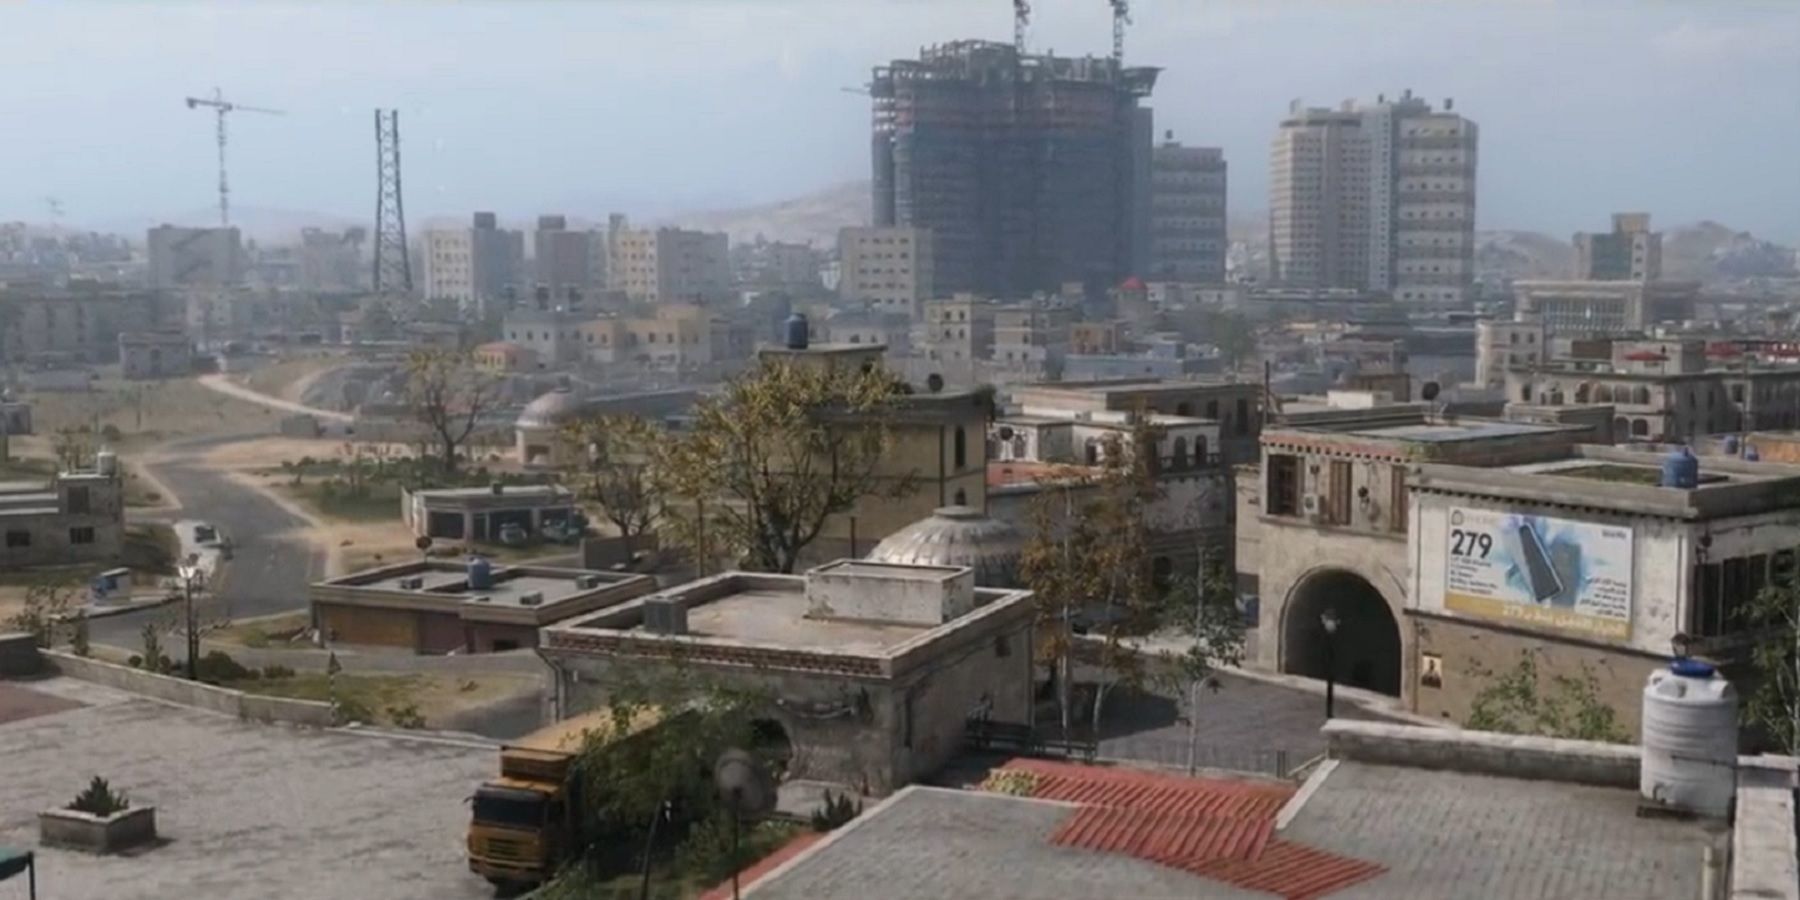 Call of Duty: Next Reveals Urzikstan, the New Big Map Coming to Call of  Duty: Warzone